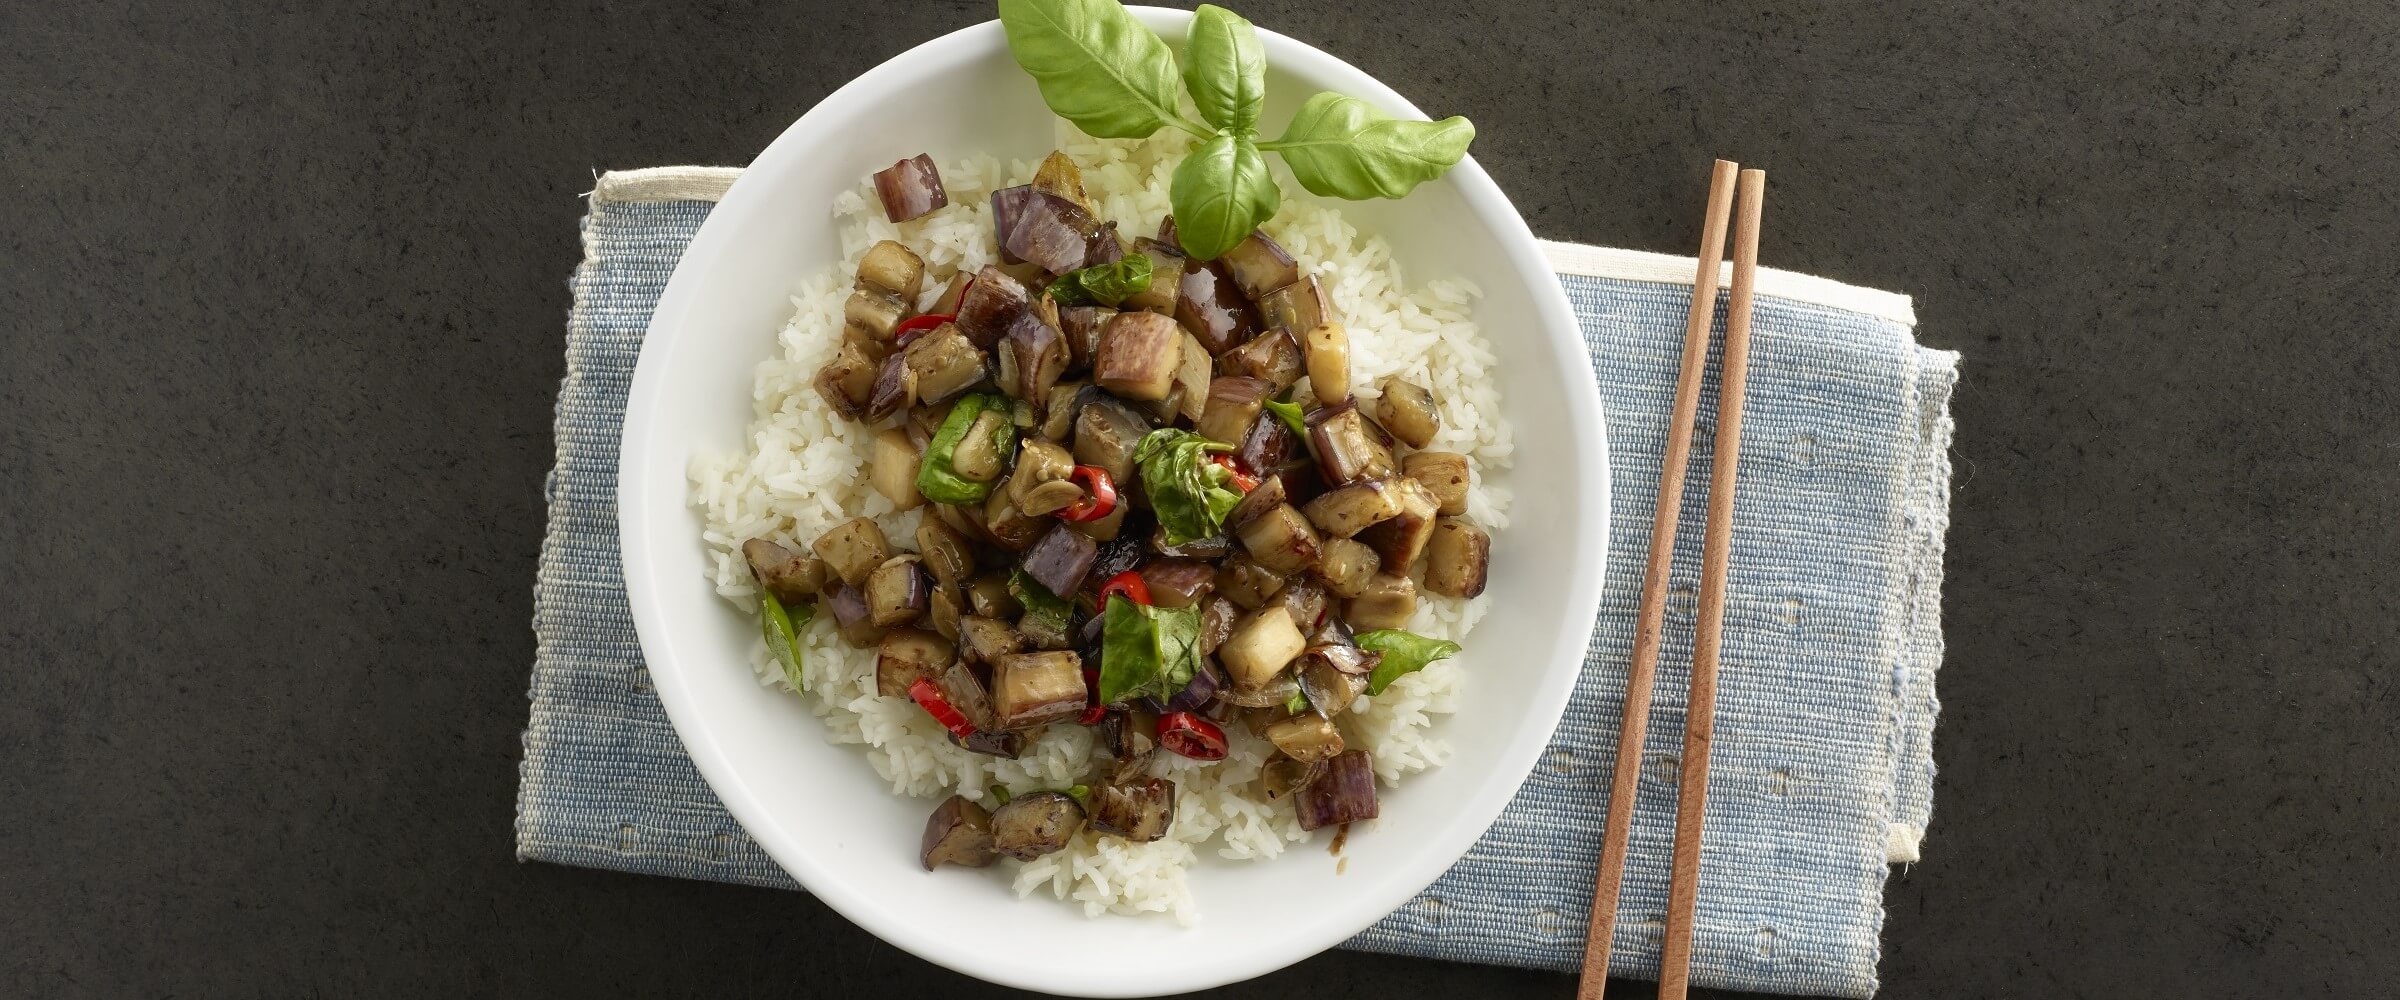 thai basil eggplant over rice in white bowl with chopsticks